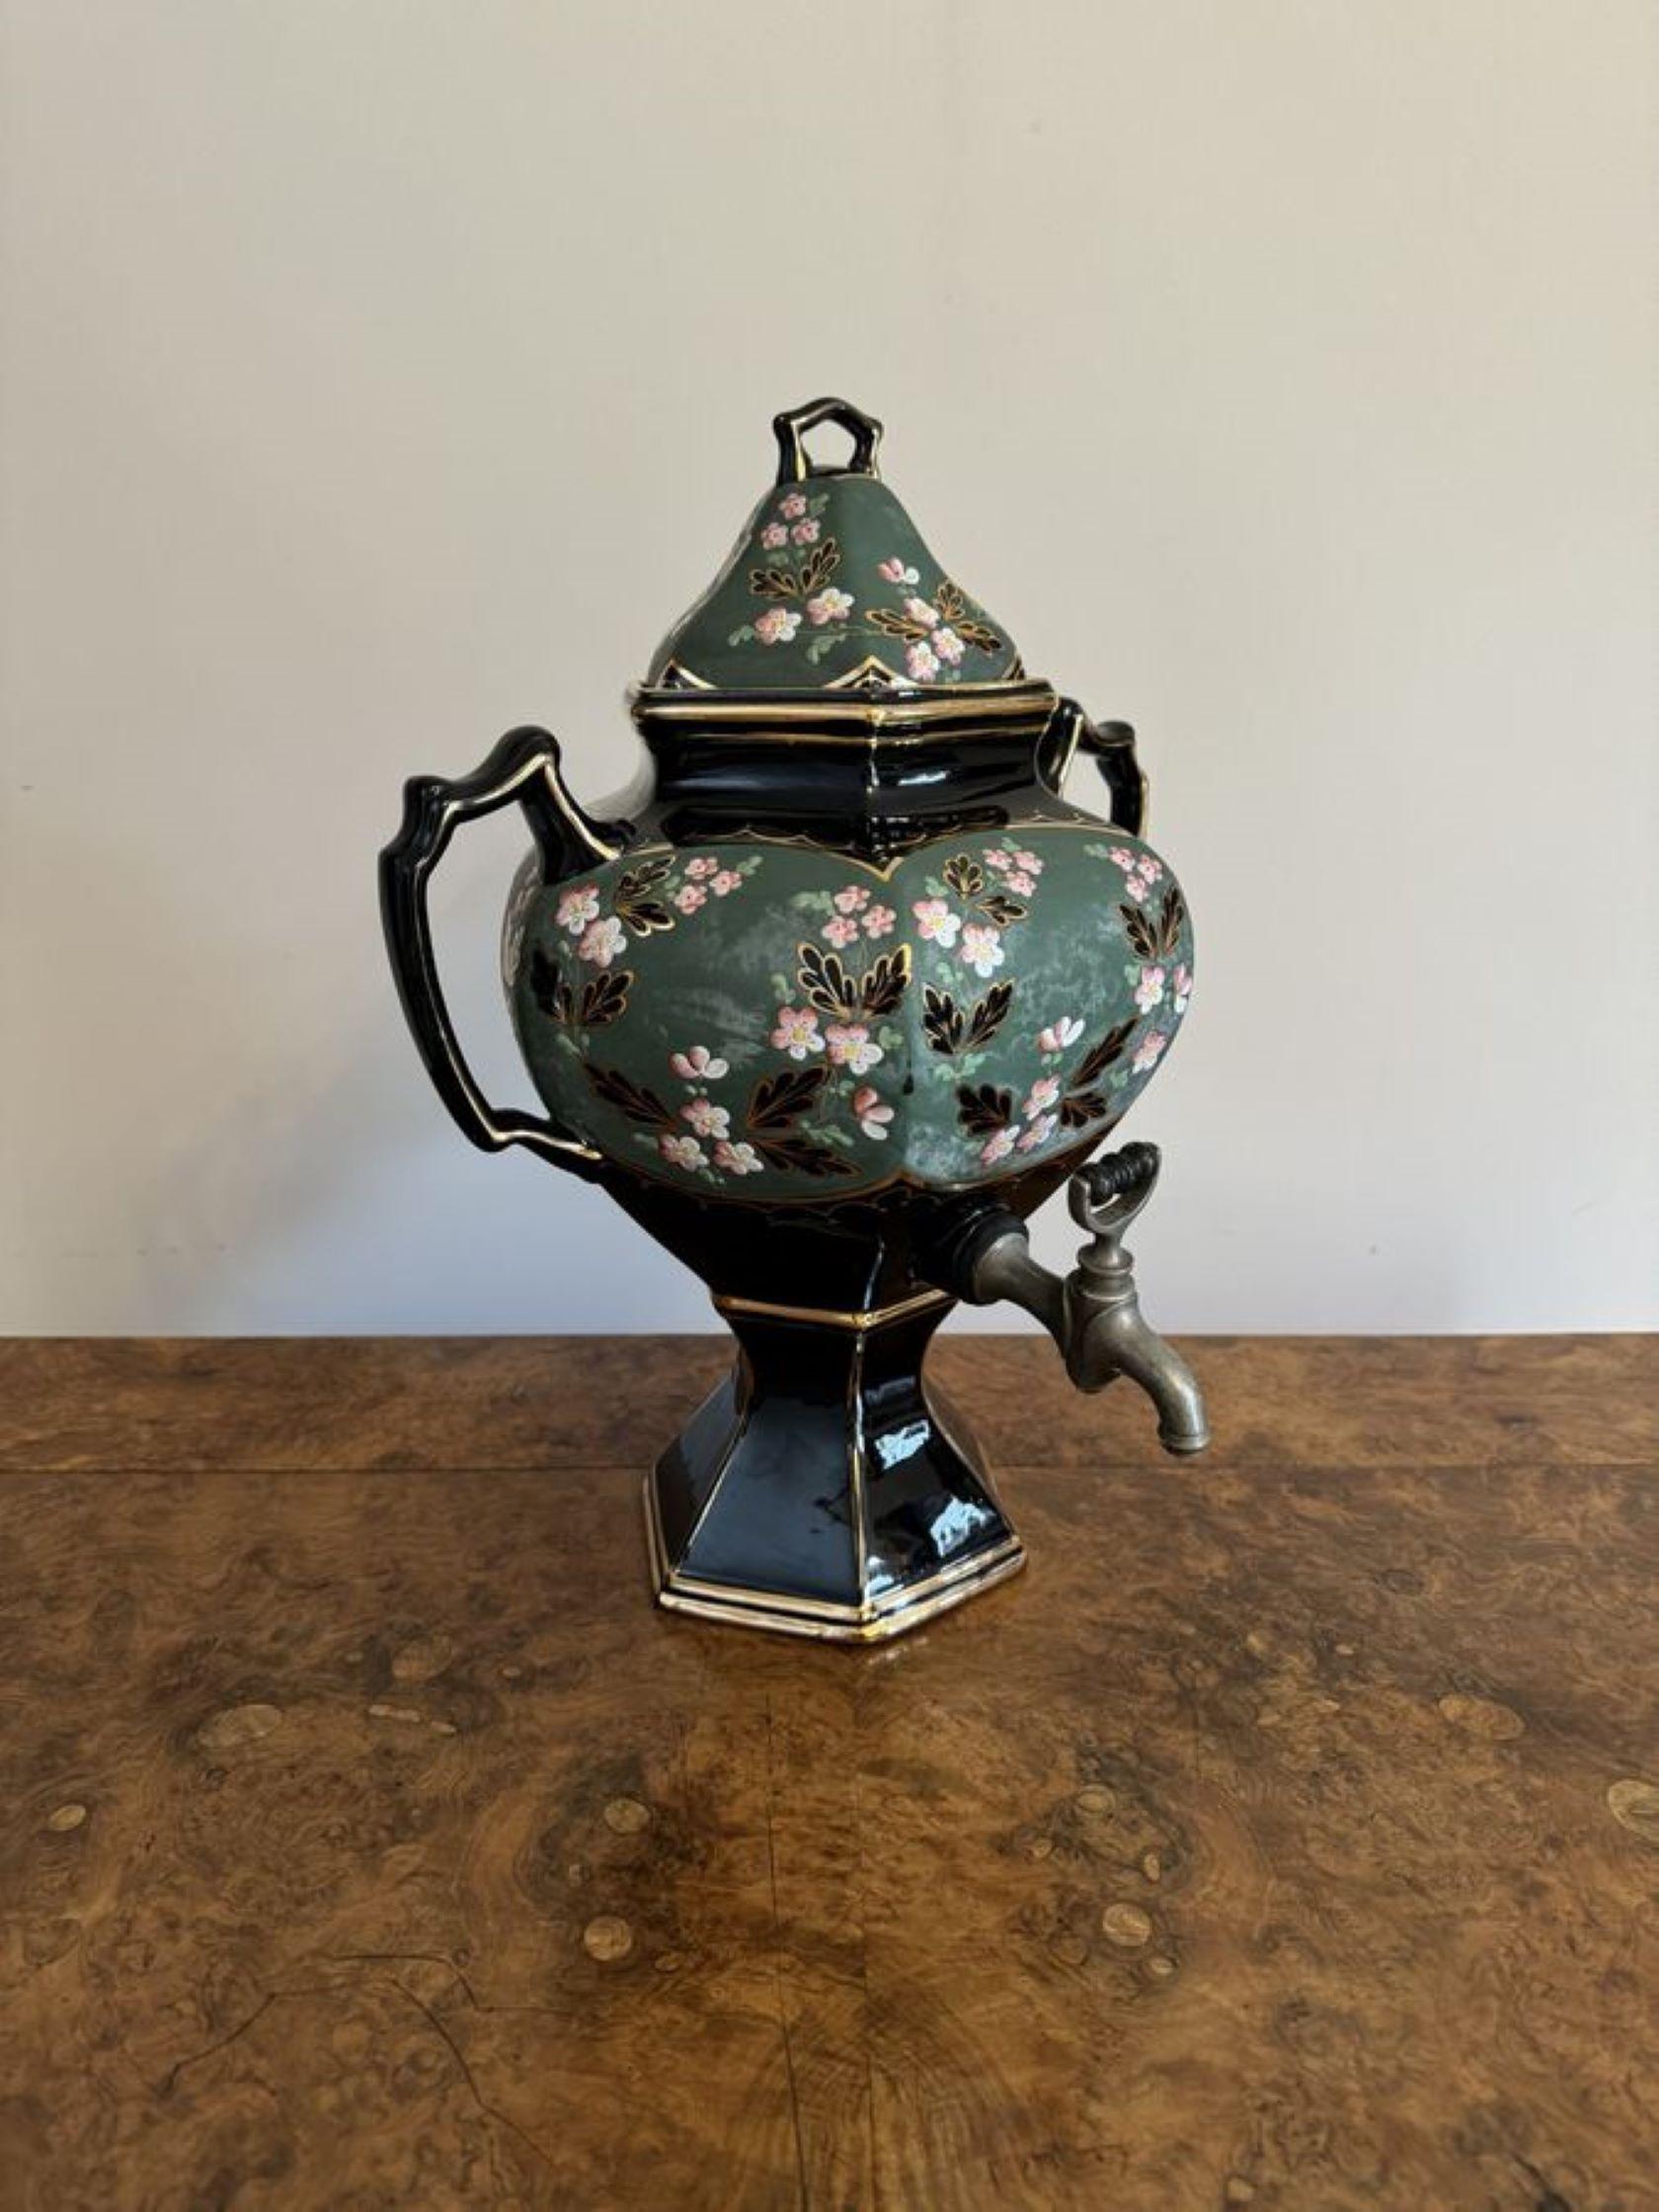 Outstanding quality unusual antique Victorian samovar having a quality Victorian Staffordshire hexagonal shaped samovar with scroll carrying handles to the sides, a lift off lid to the top, and the original tap to the front, decorated with pink